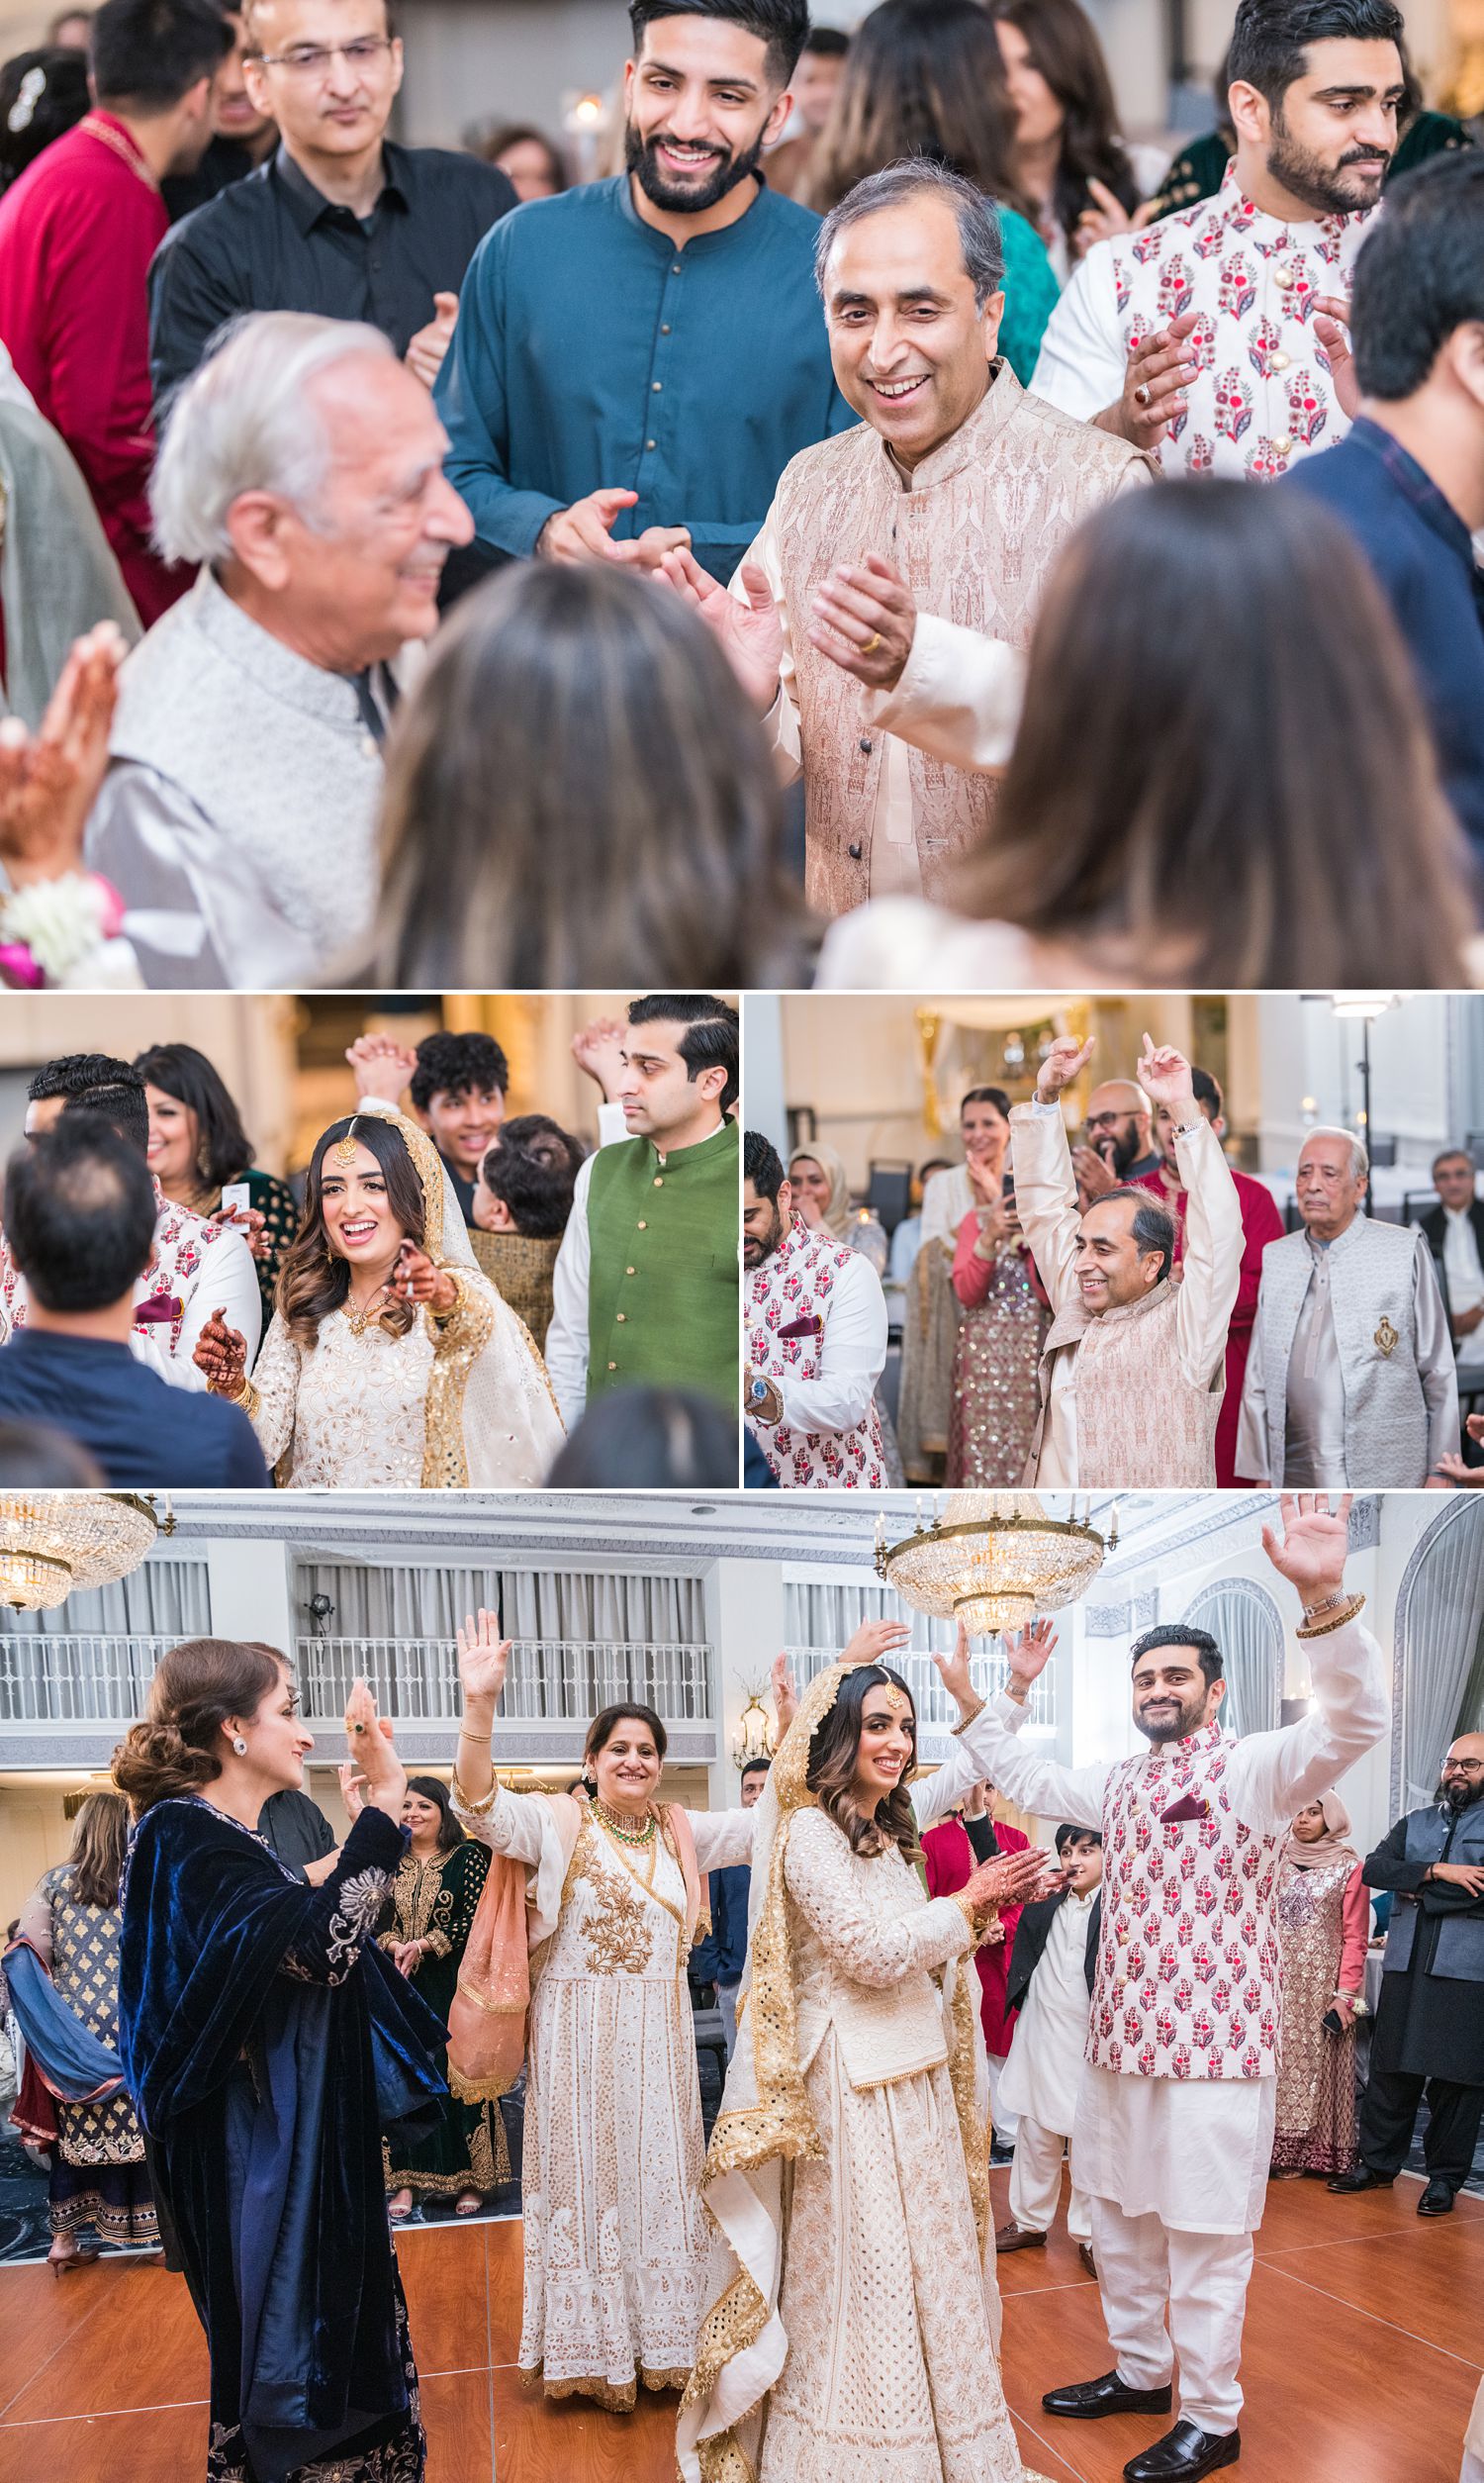 Dancing at Pakistani wedding in Hilton Chicago wedding venue photographed by Maha Studios